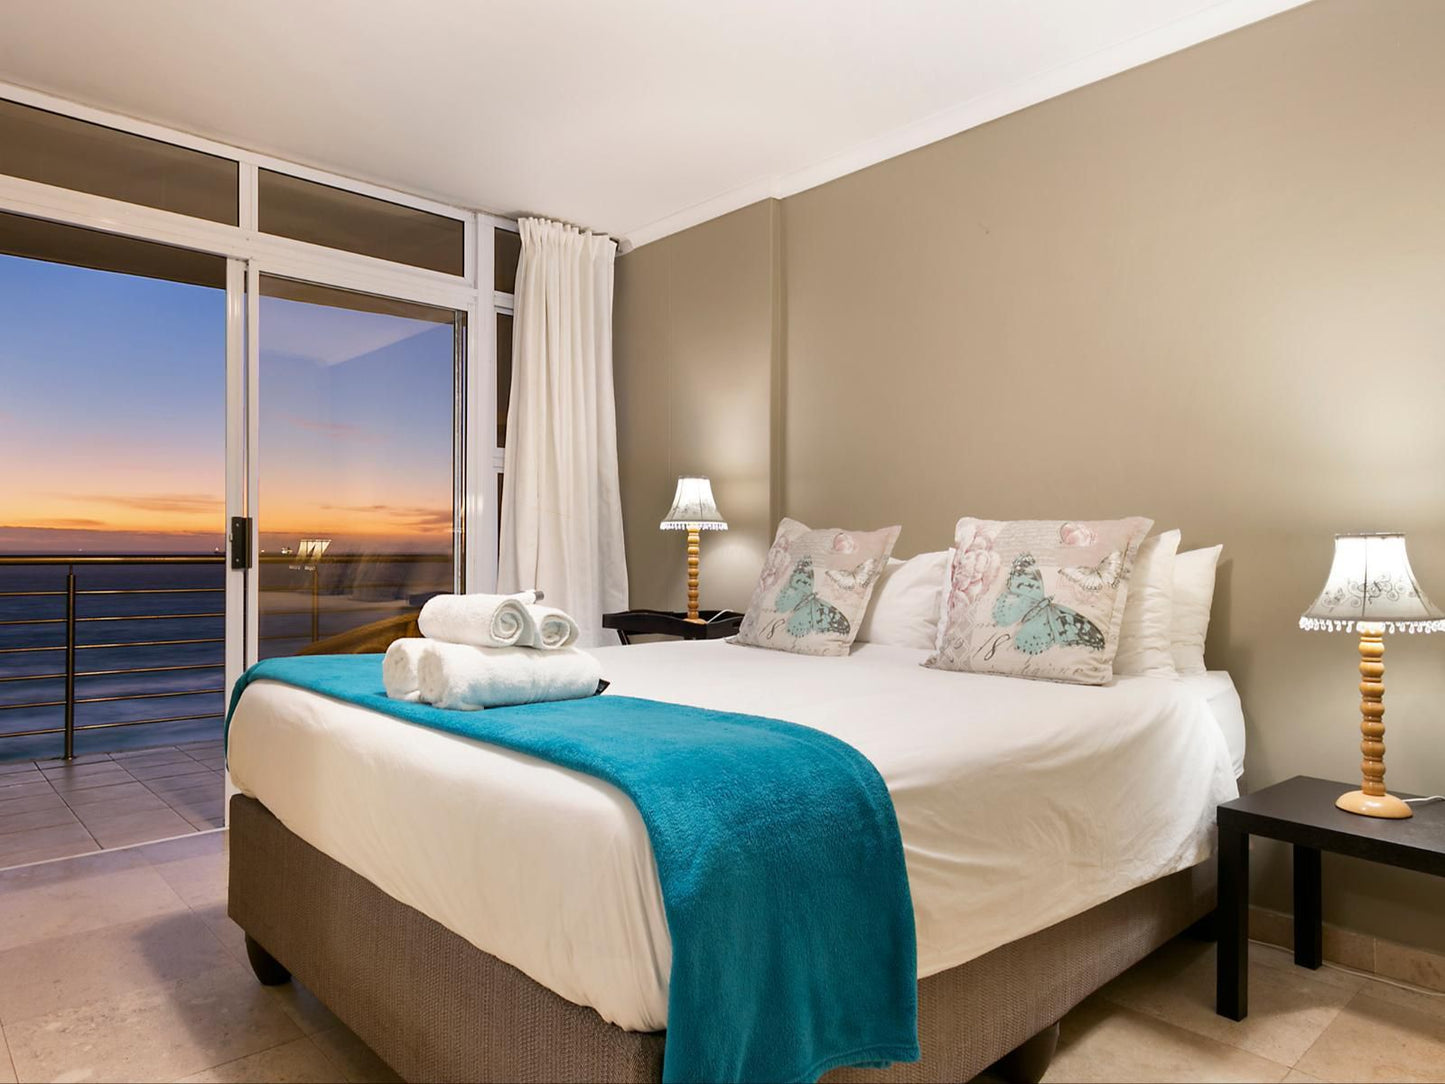 The Waves 1002 By Hostagents Bloubergstrand Blouberg Western Cape South Africa Bedroom